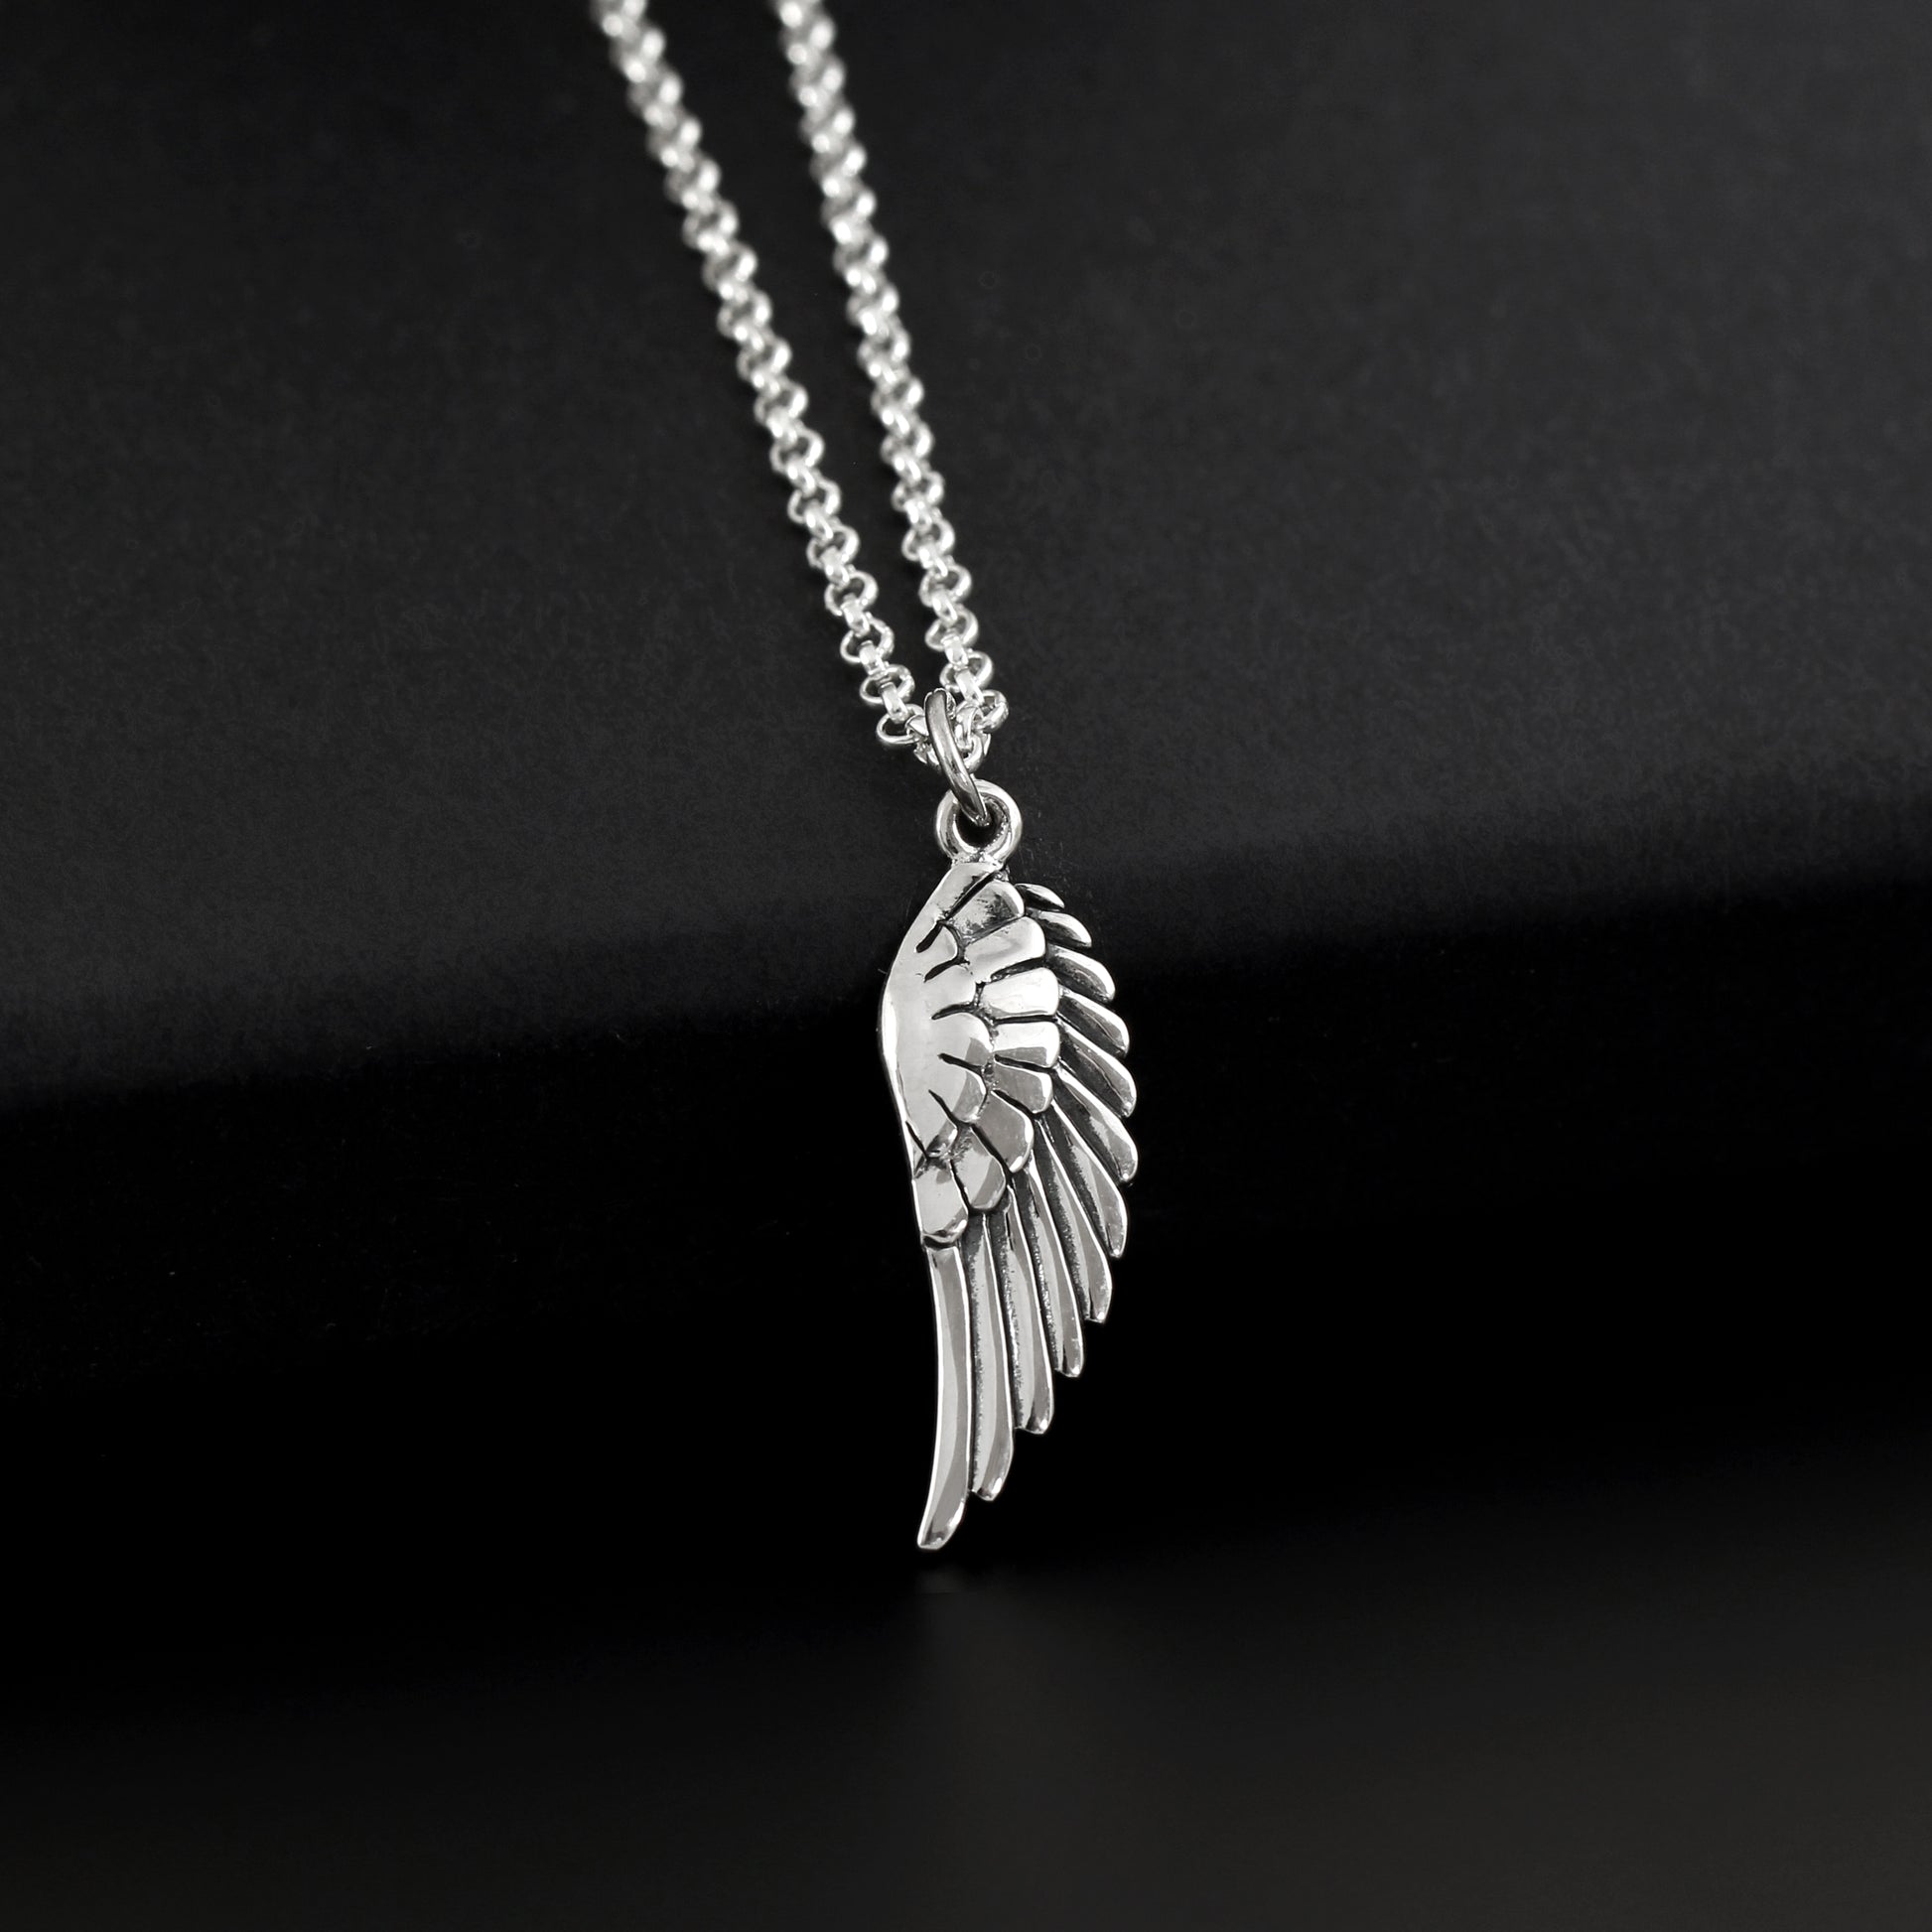 A Charmed Impression 11 11 Large Angel Wing Pendant Necklace